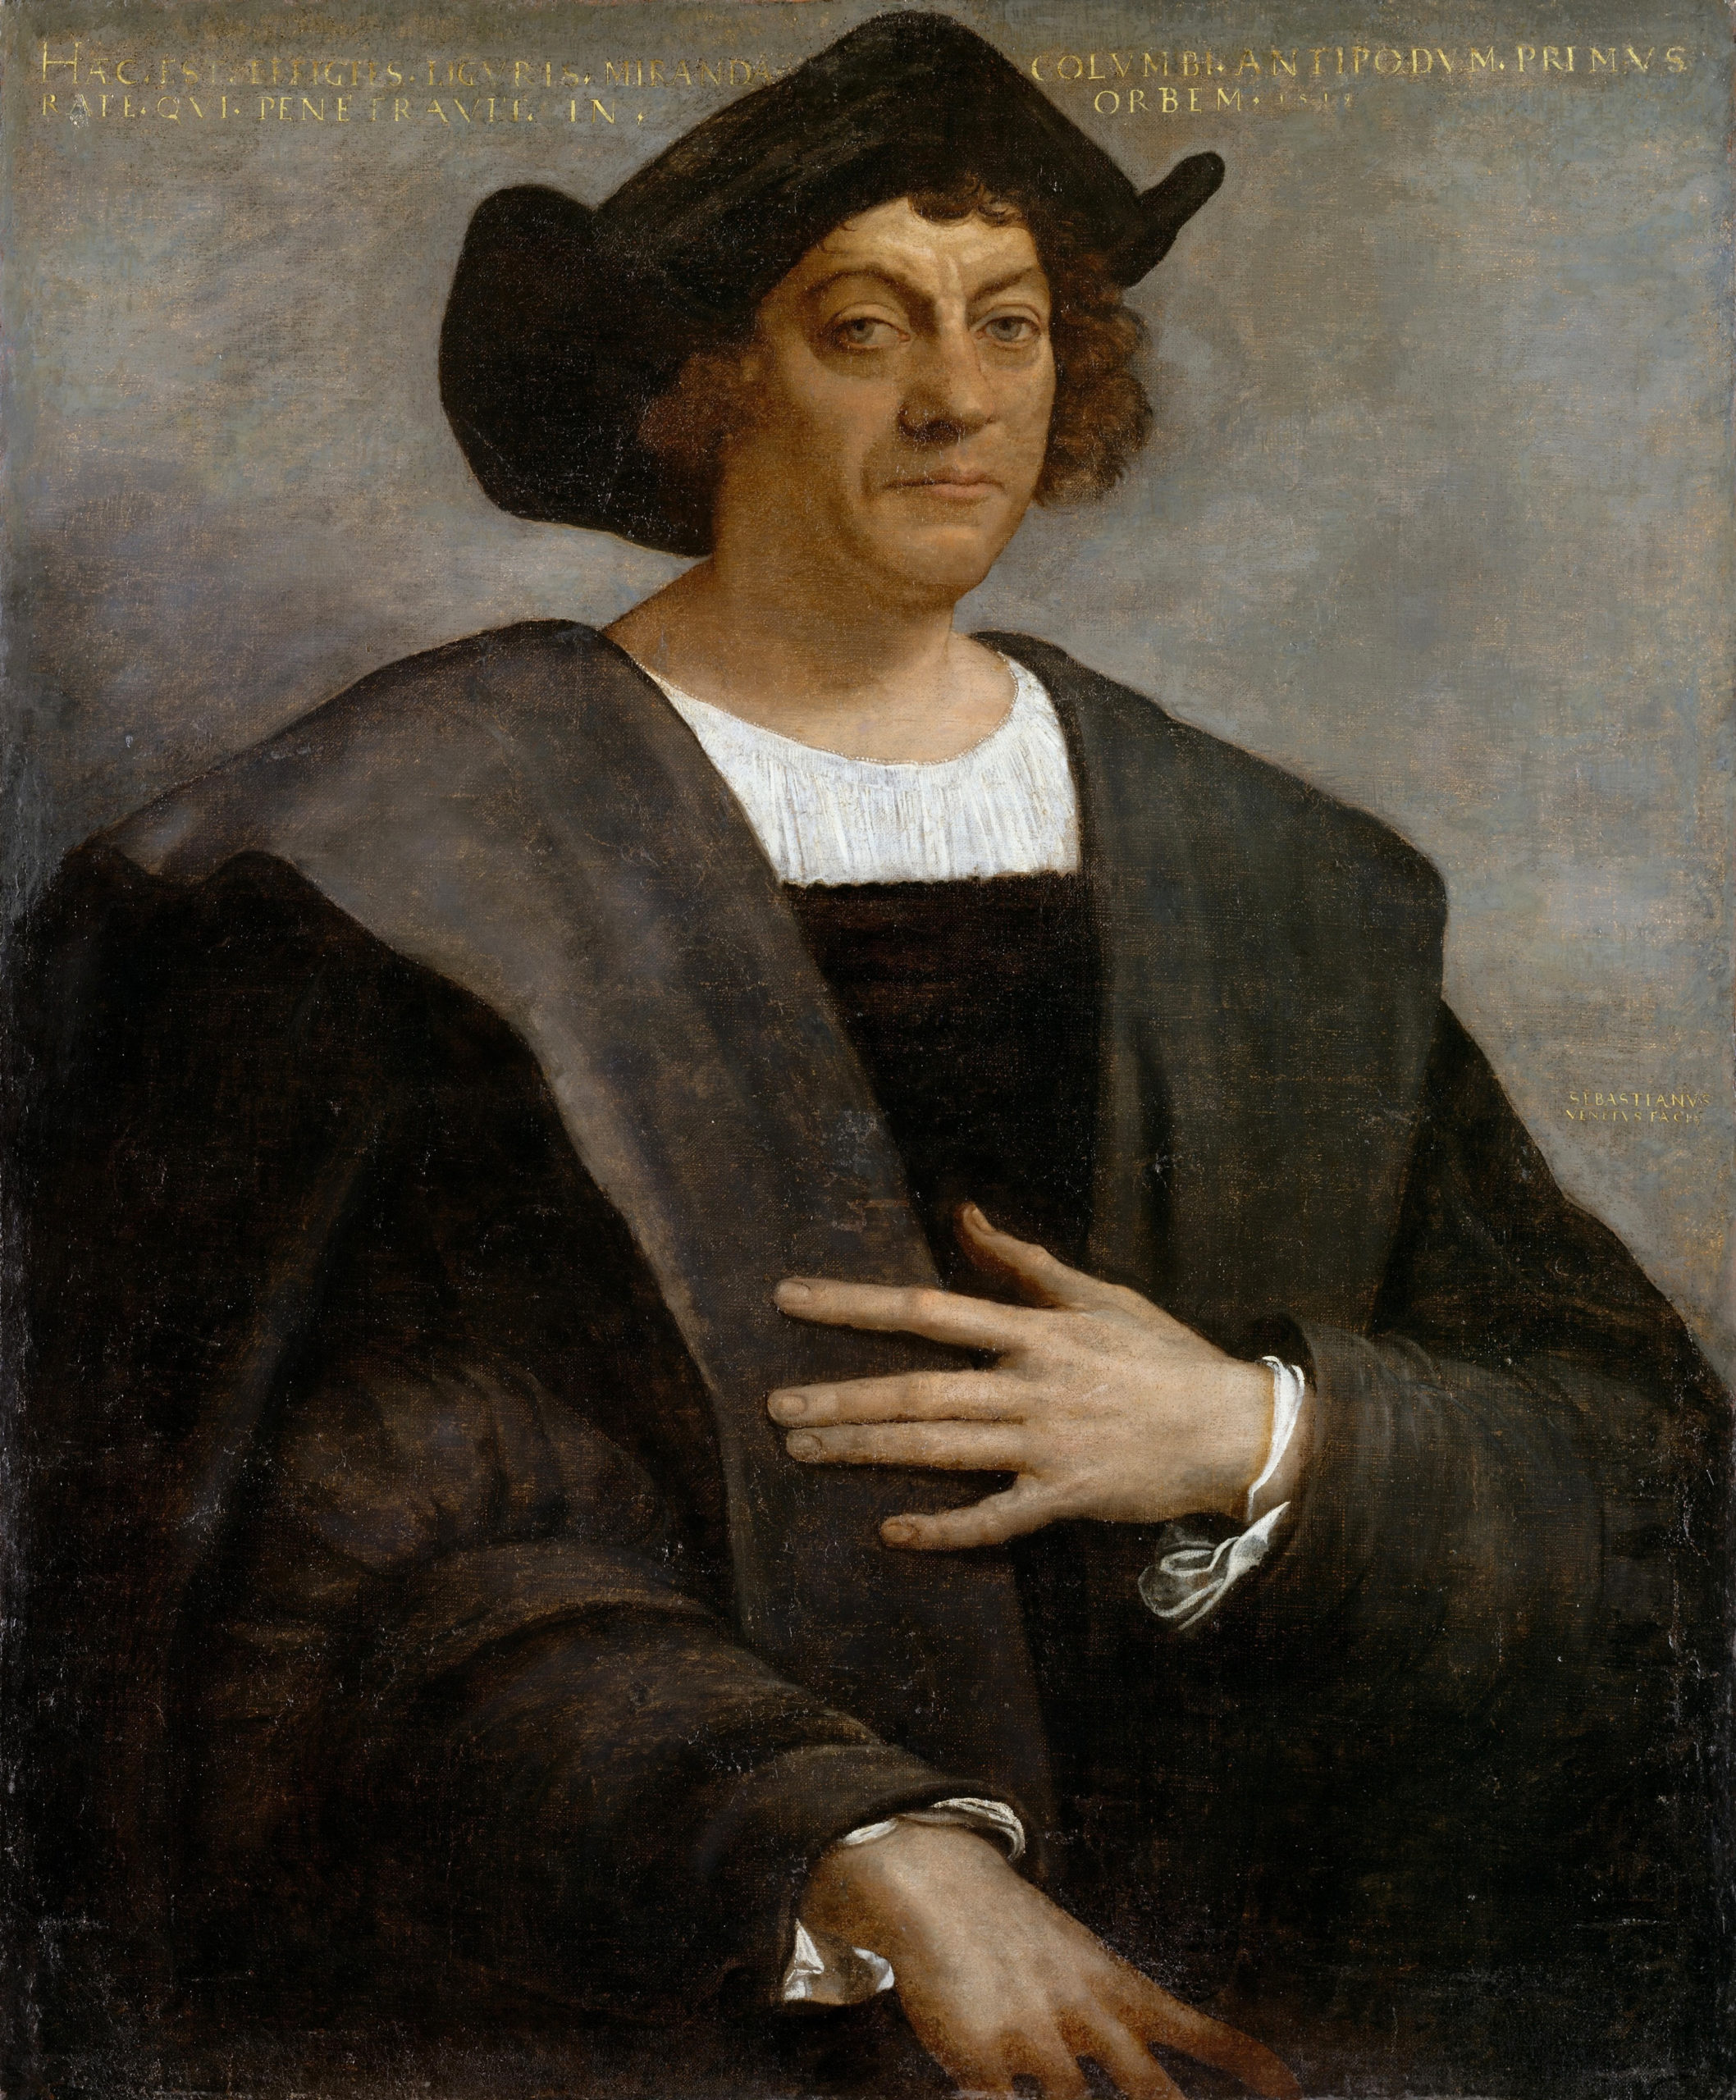 A posthumous portrait of a man said to be Christopher Columbus by artist Sebastiano del Piombo in 1519. 